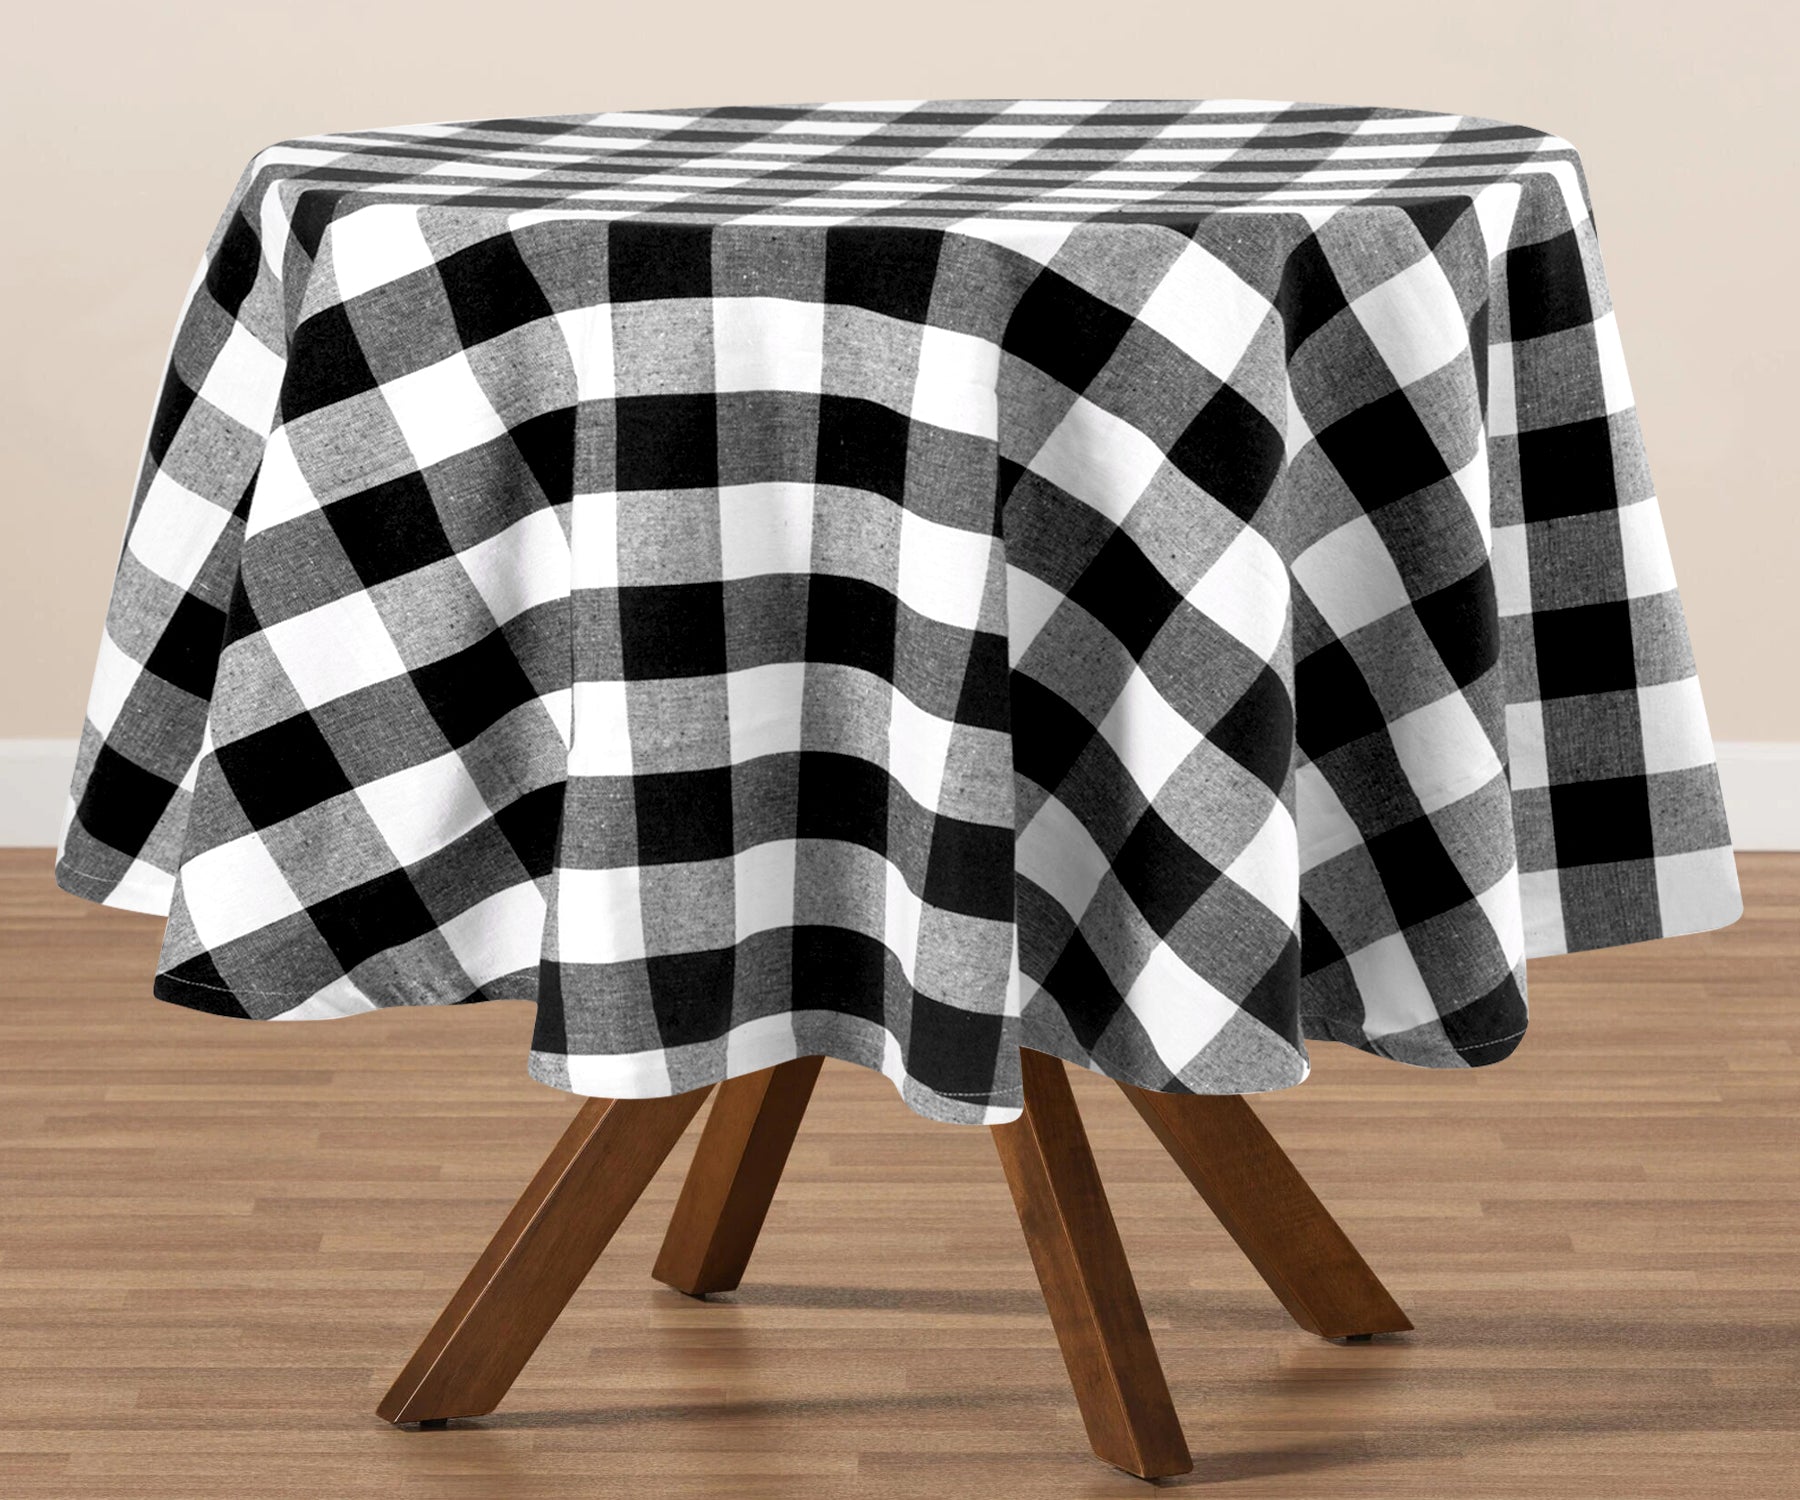 Black cloth tablecloth, a charming addition, infuses rustic appeal into your dining decor with its classic pattern.